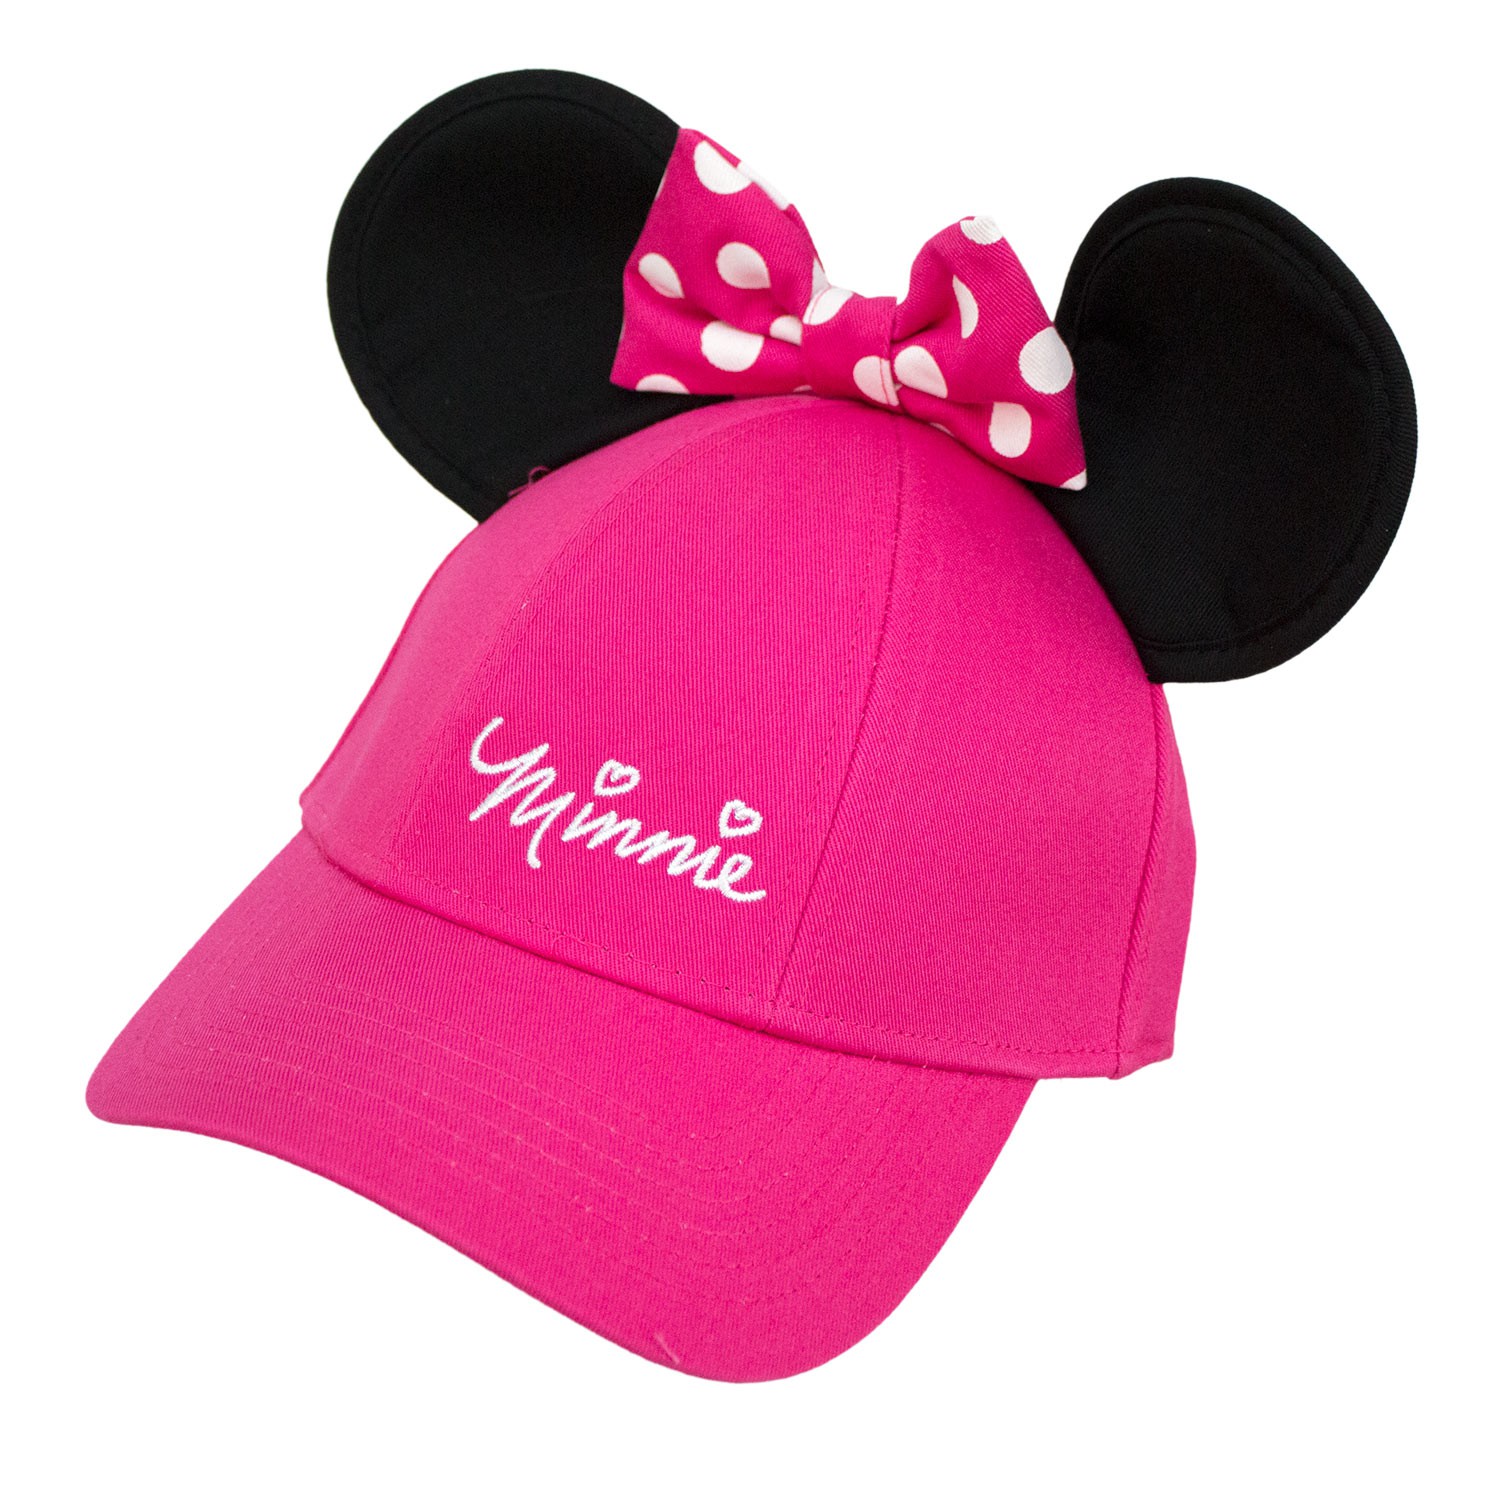 Disney Hat - Baseball Cap for Girls - Minnie Mouse Ears with